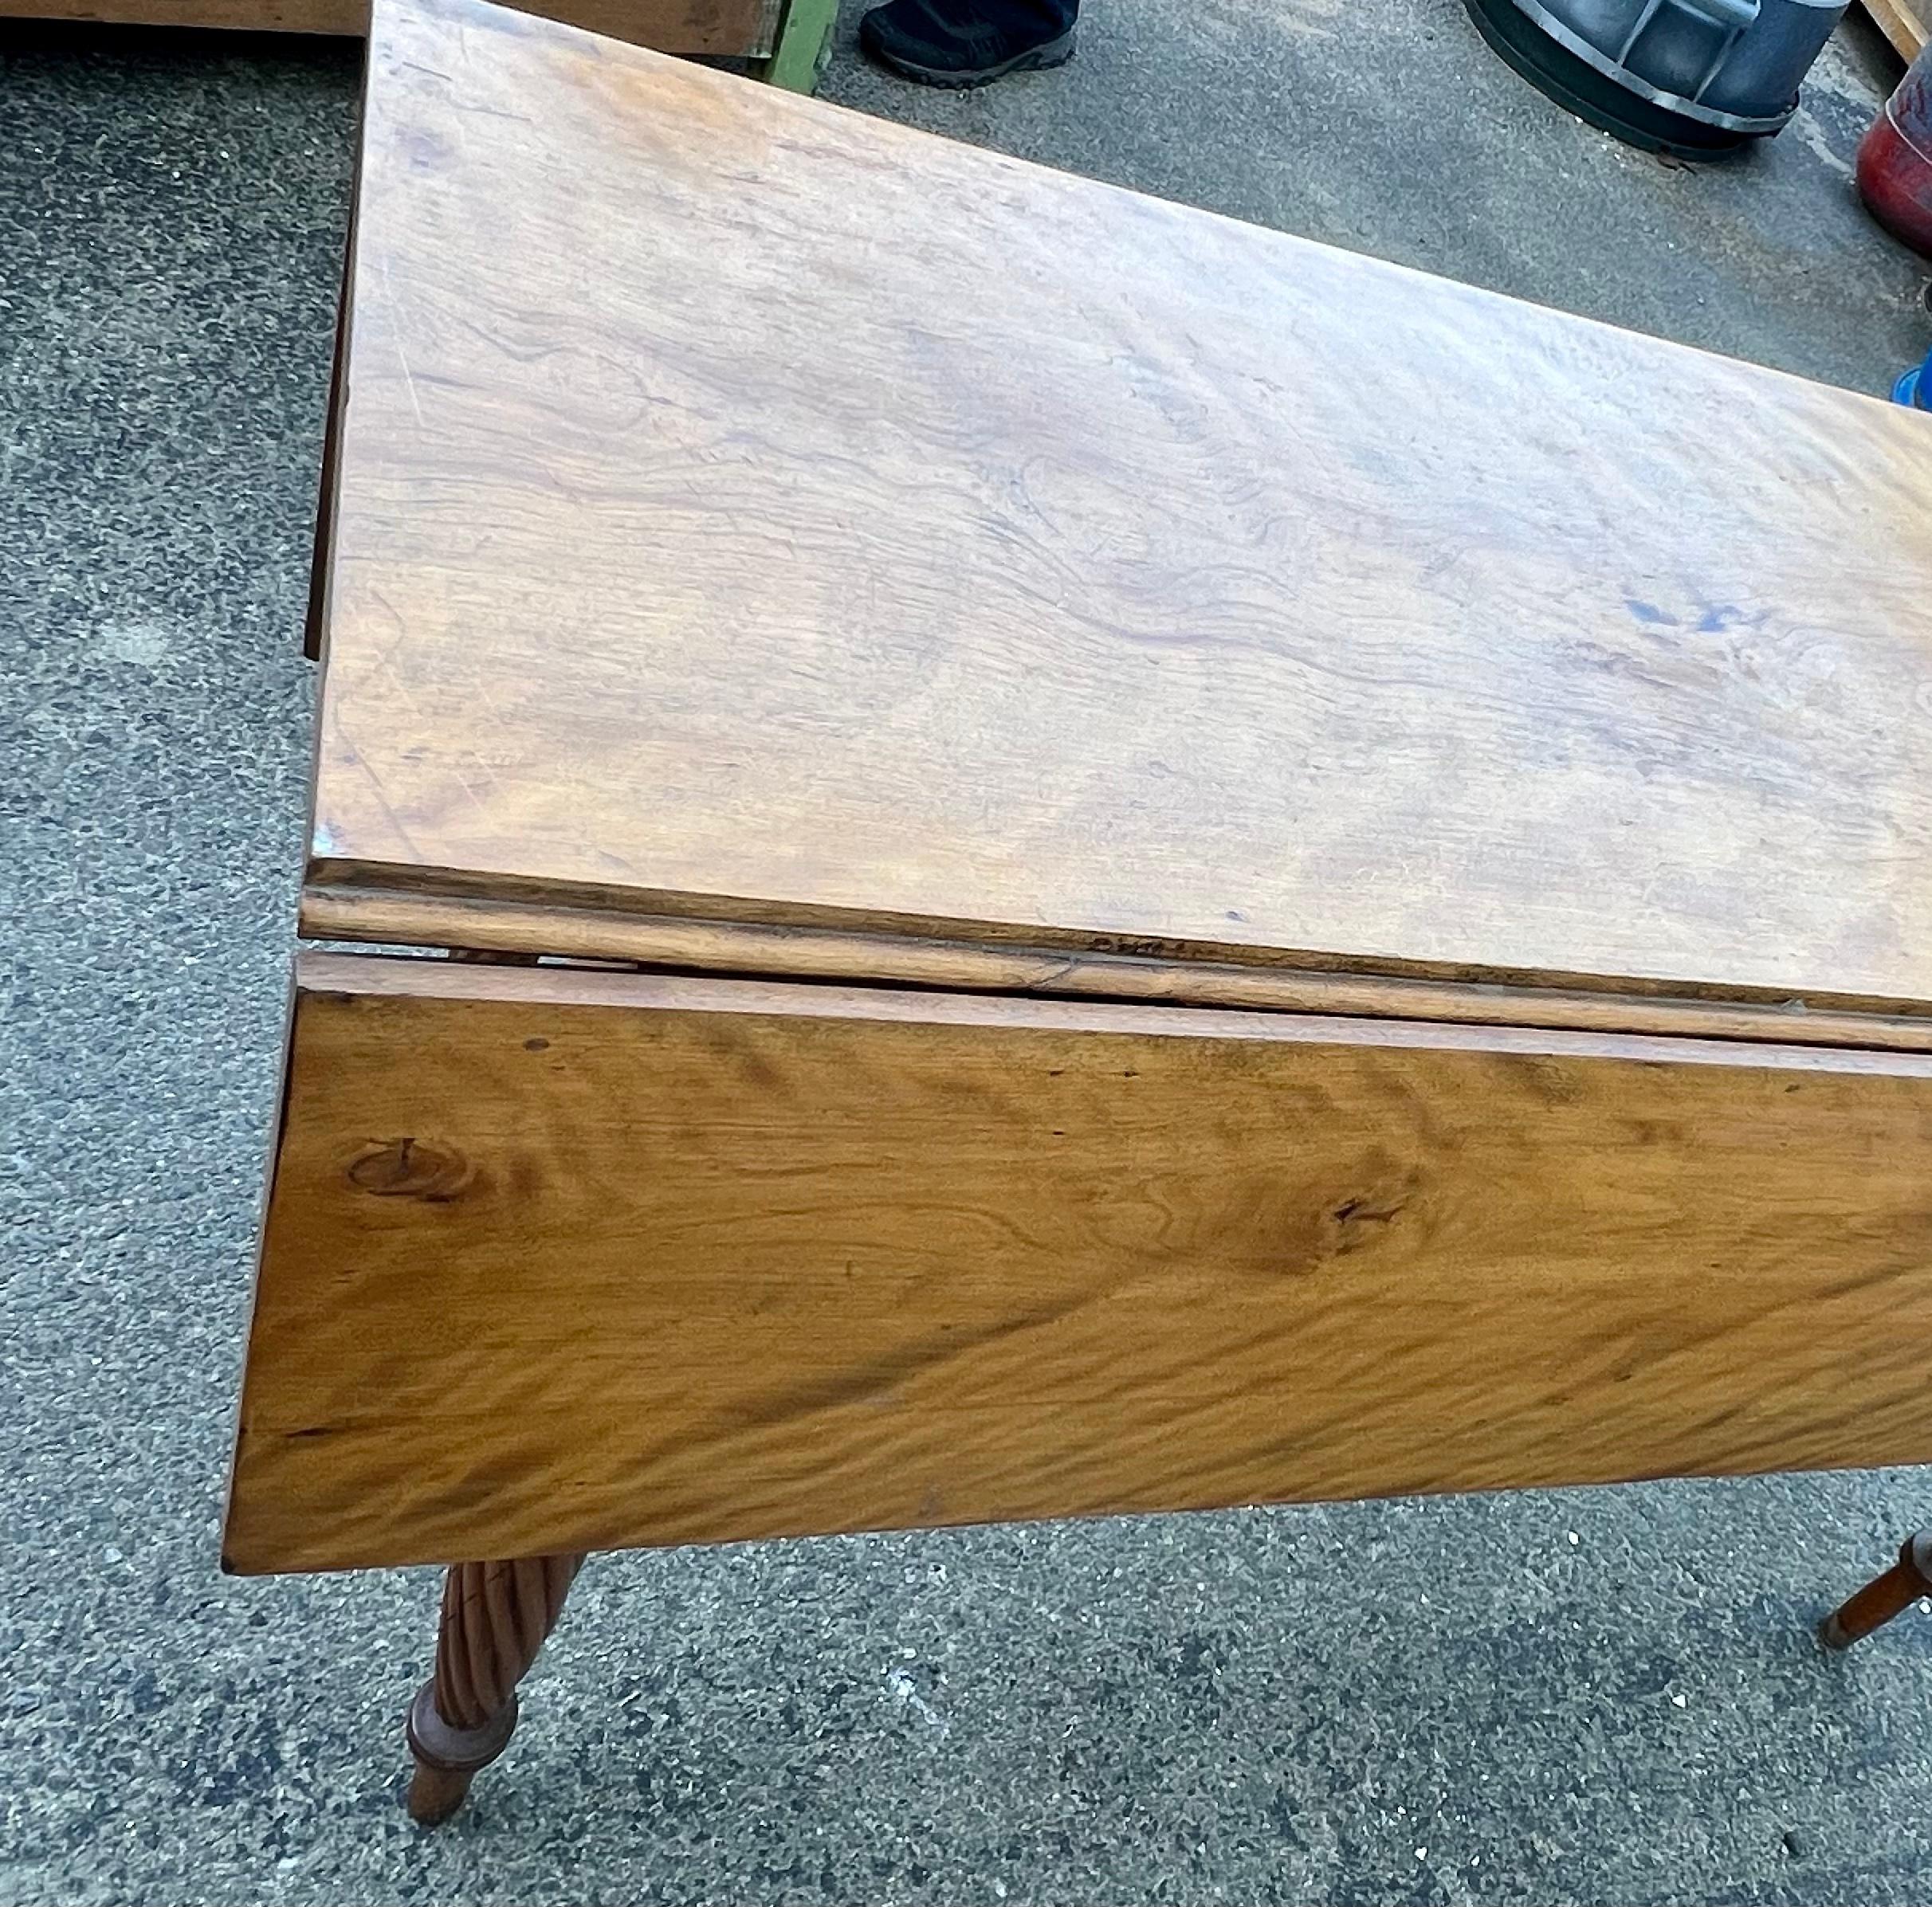 19th Century Flame Birch Drop Leaf Table with Spiral Carved Legs In Good Condition For Sale In Nantucket, MA